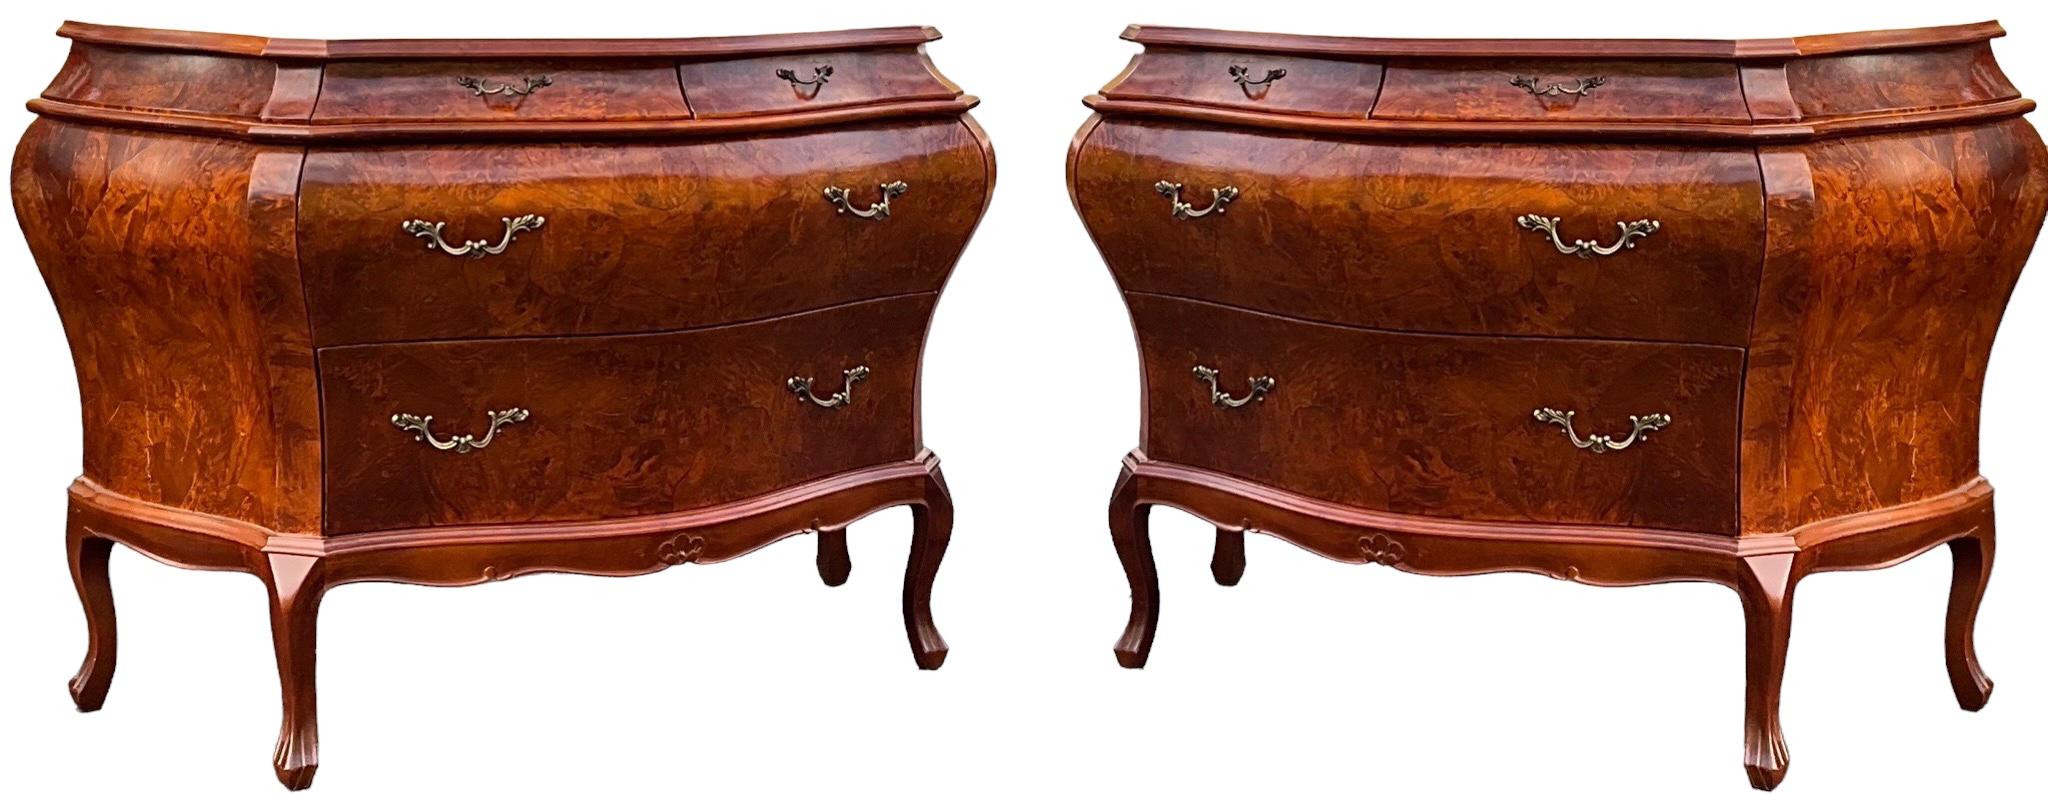 This is a pair of Italian burlwood serpentine chests with French styling. They have paper lined drawers, and are marked on the backs. They are in very good condition.

My shipping is for the Continental US only, and it can take two to five weeks.